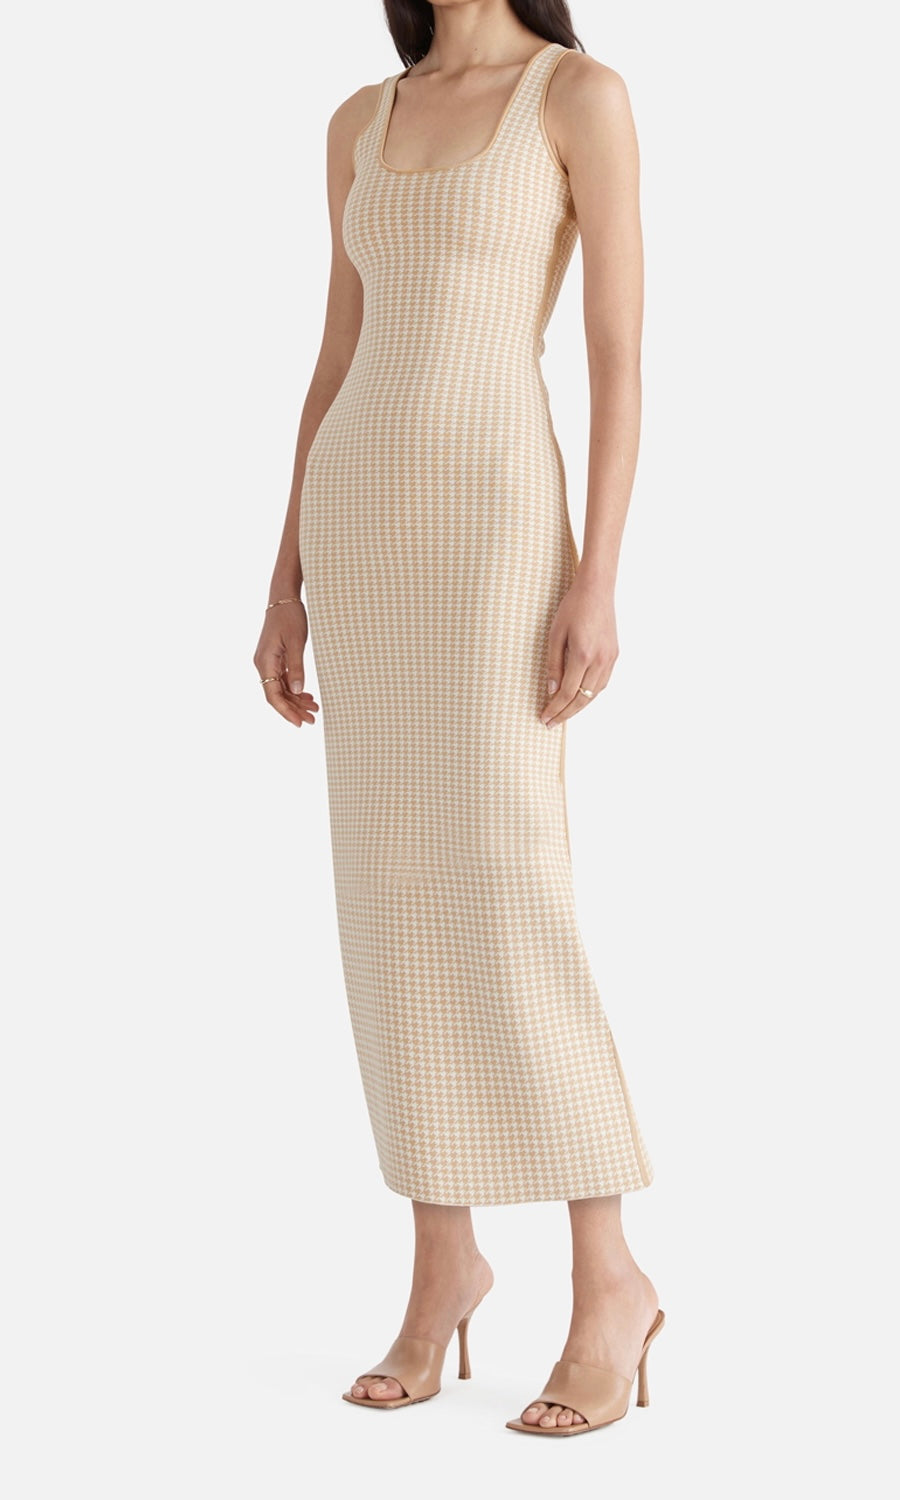 Ena Pelly Evie Luxe Knit Maxi Dress In Houndstooth